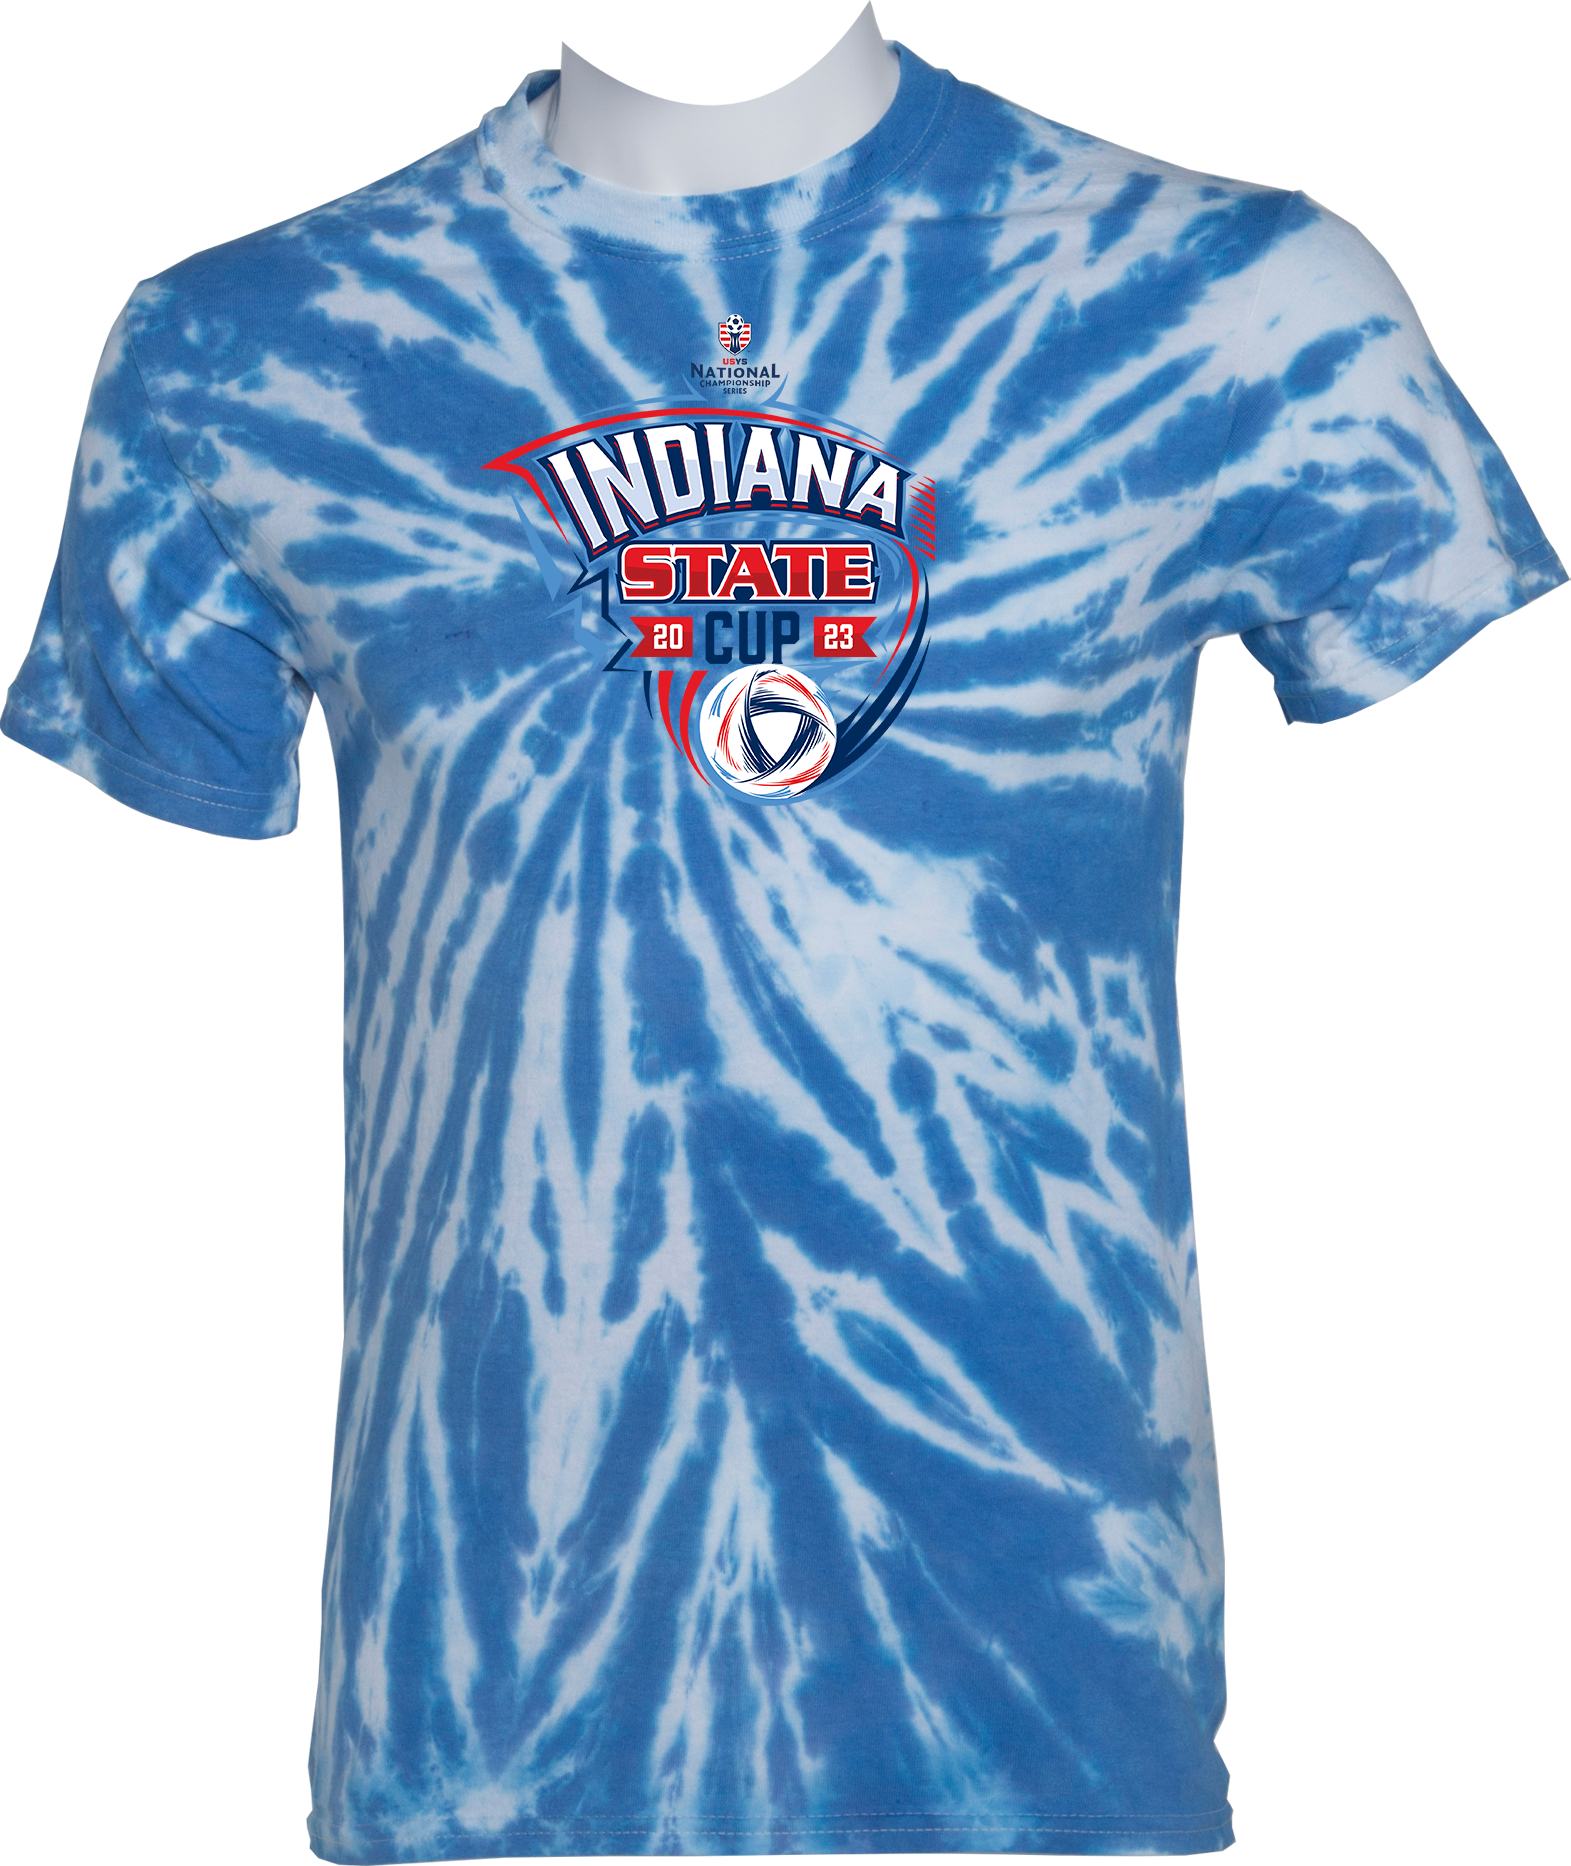 TIE-DYE SHORT SLEEVES - 2023 Indiana State Cup